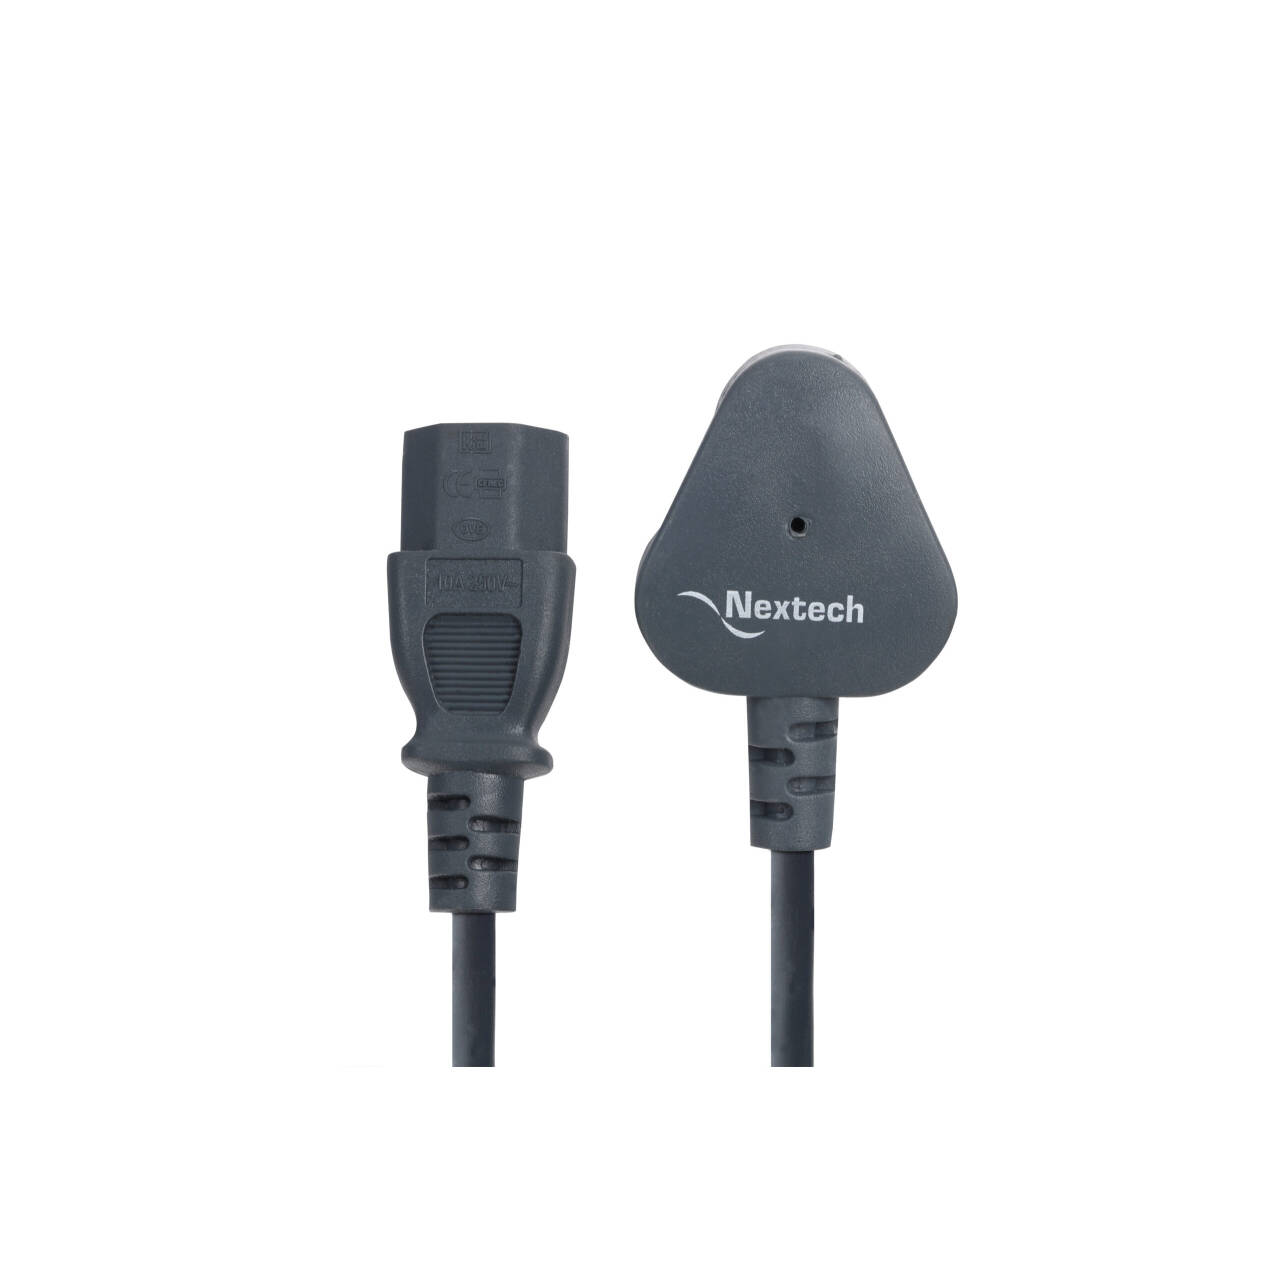 Buy Laptop Power Cable Online